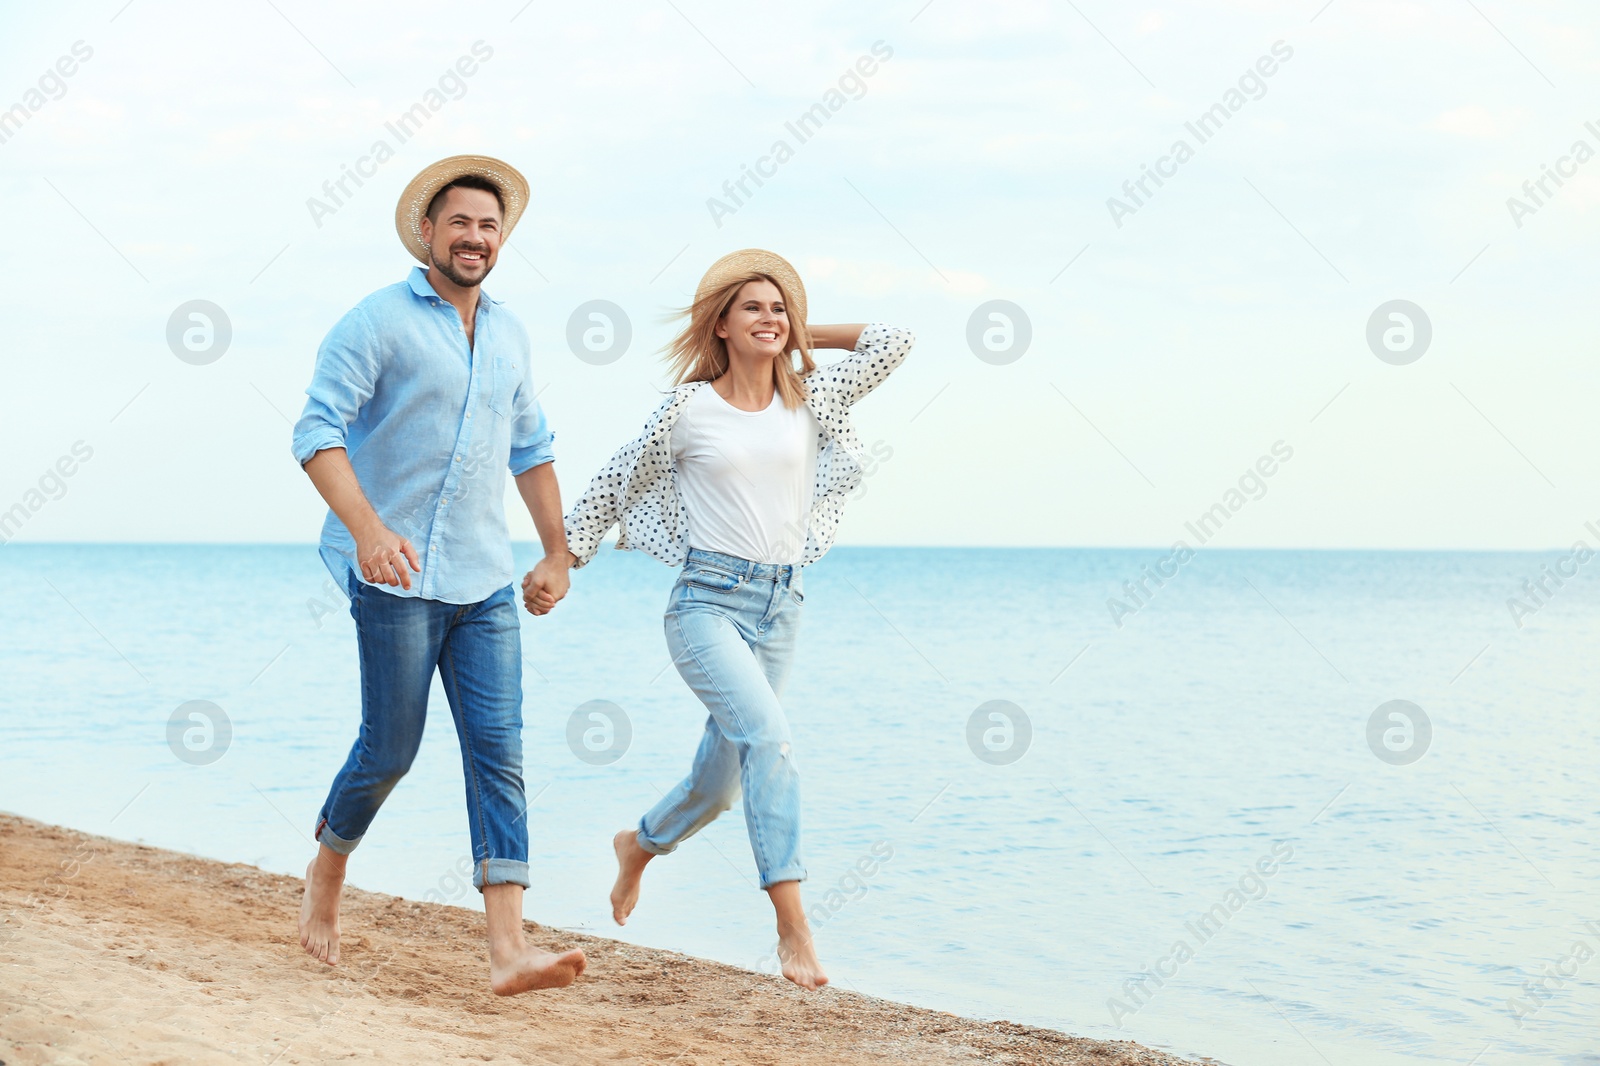 Photo of Happy romantic couple running together on beach, space for text